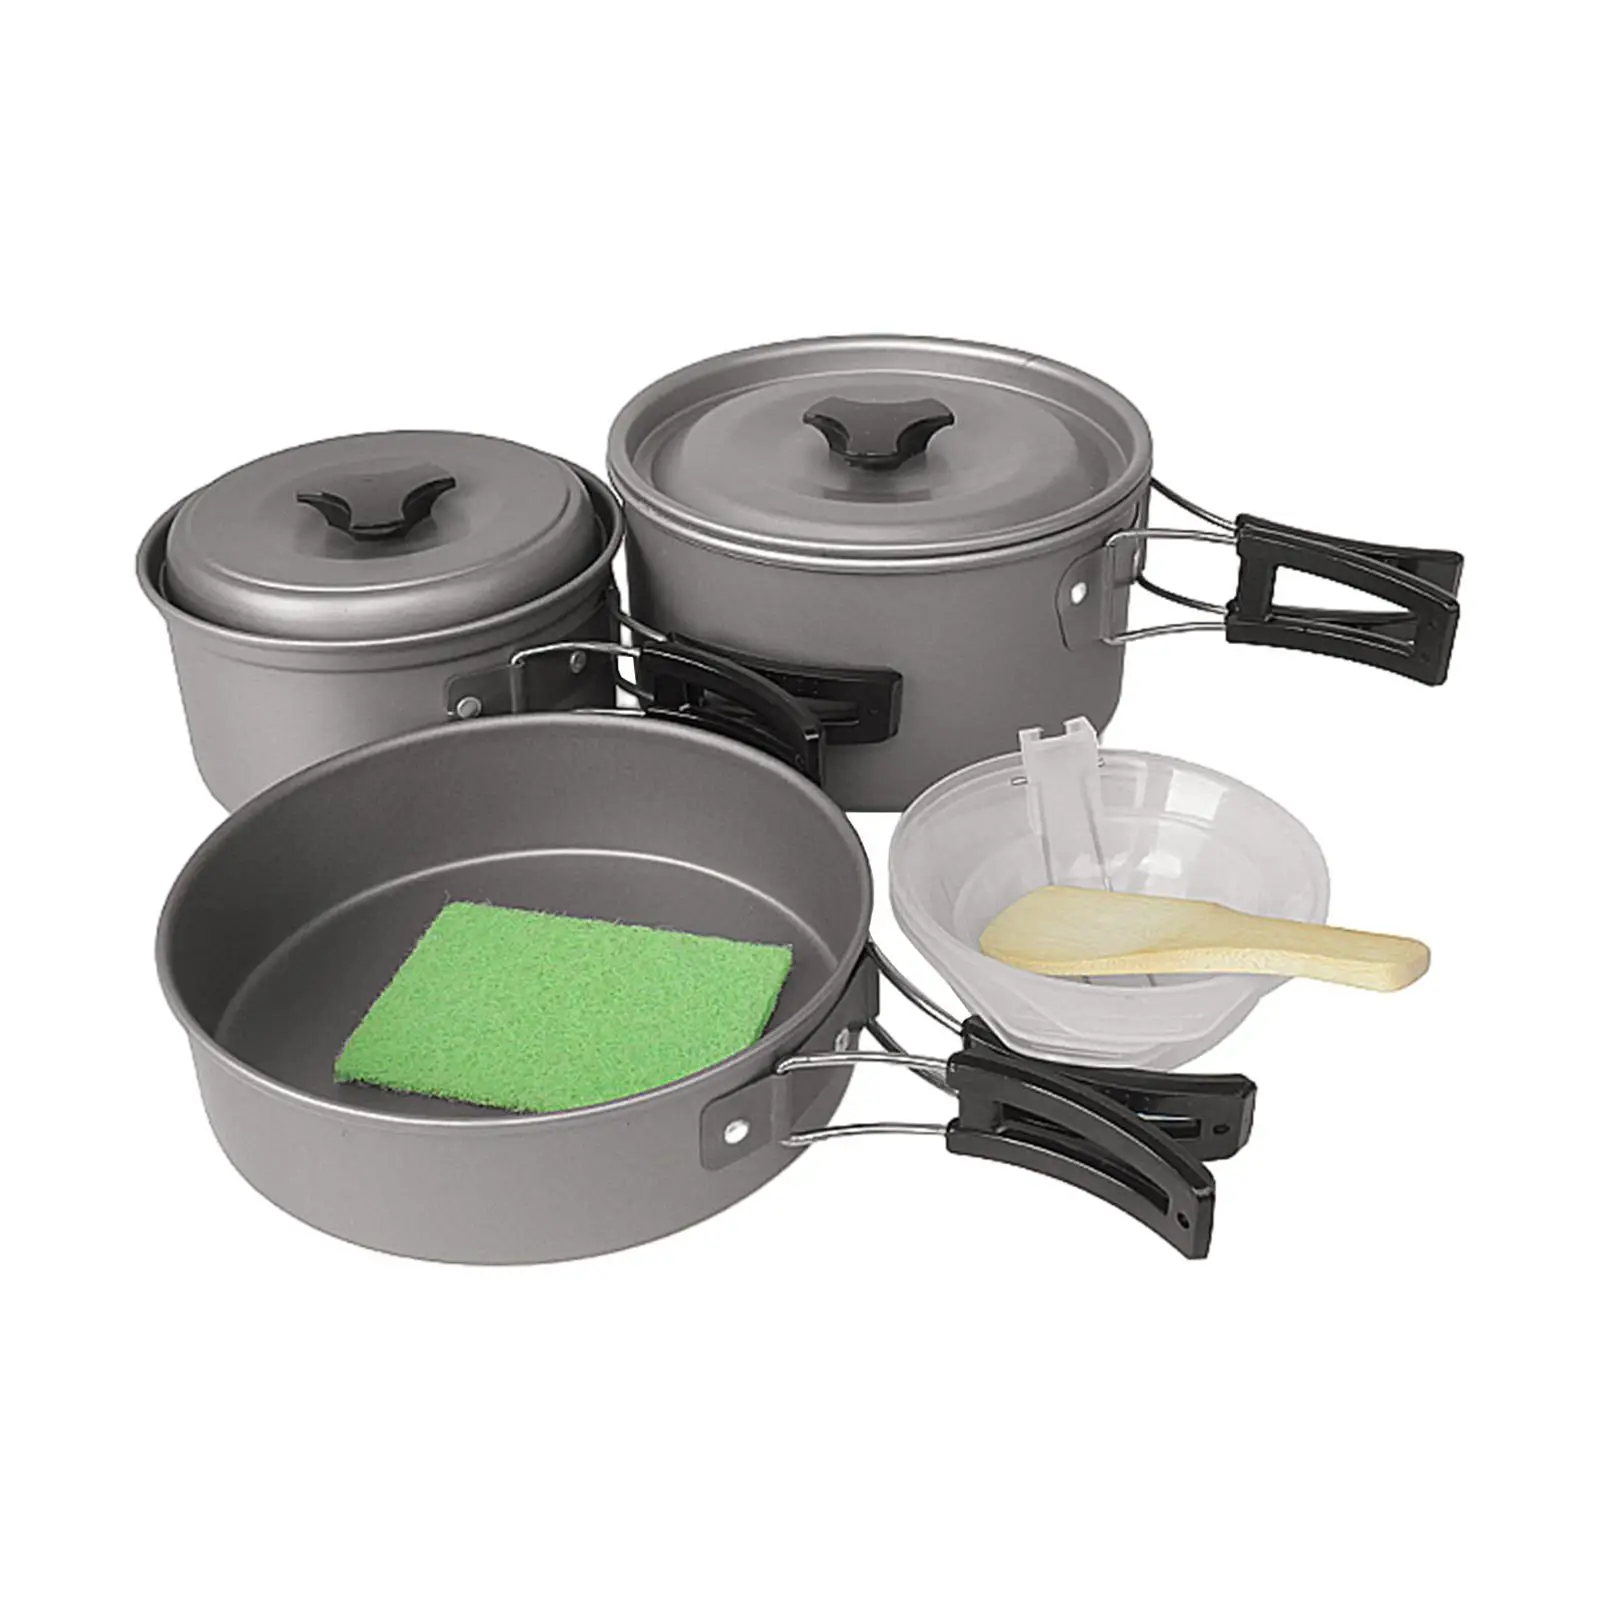 Camping Cookware Set Easy to Clean Included Mesh Carry Bag Lightweight Durable Aluminum Alloy Cooking Gear Equipment Gear